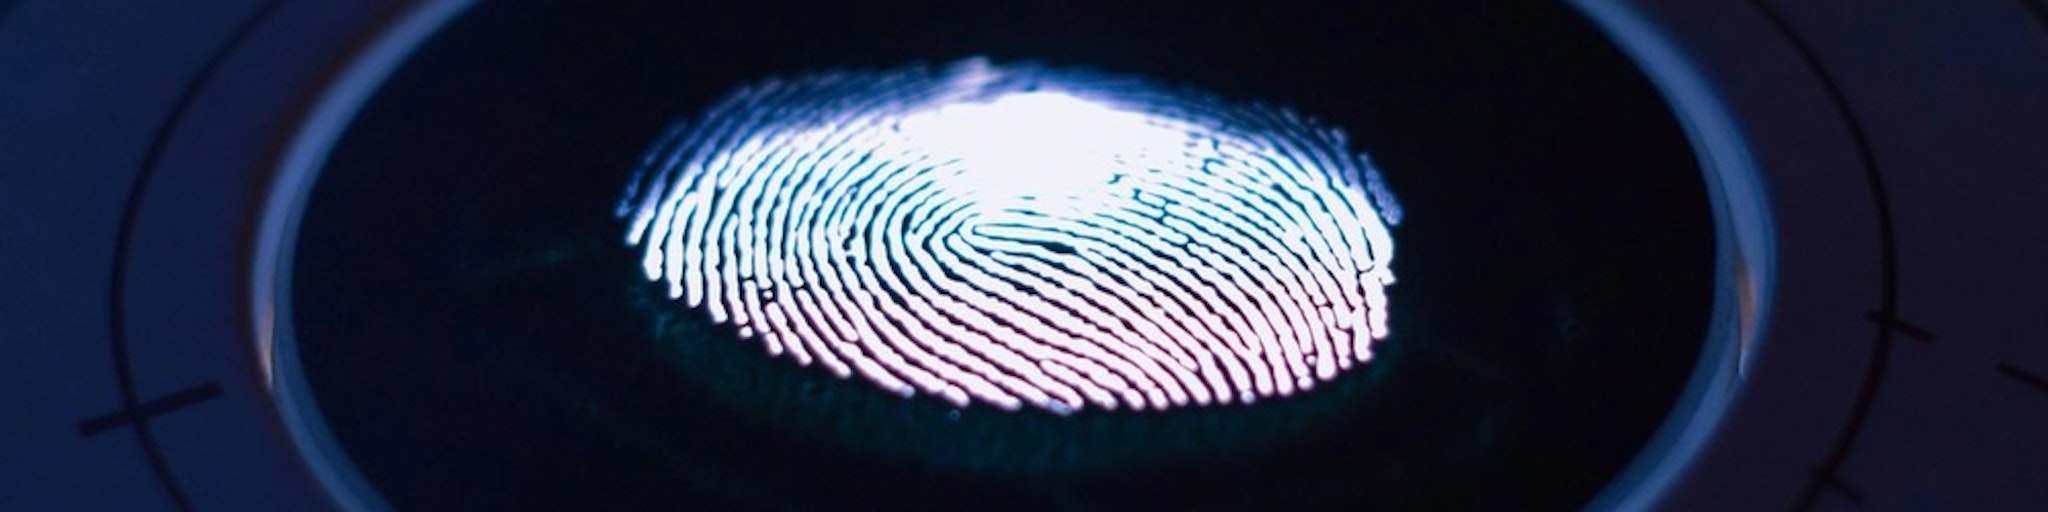 Cover Image for Do Expunged Records Show Up on Fingerprinting?